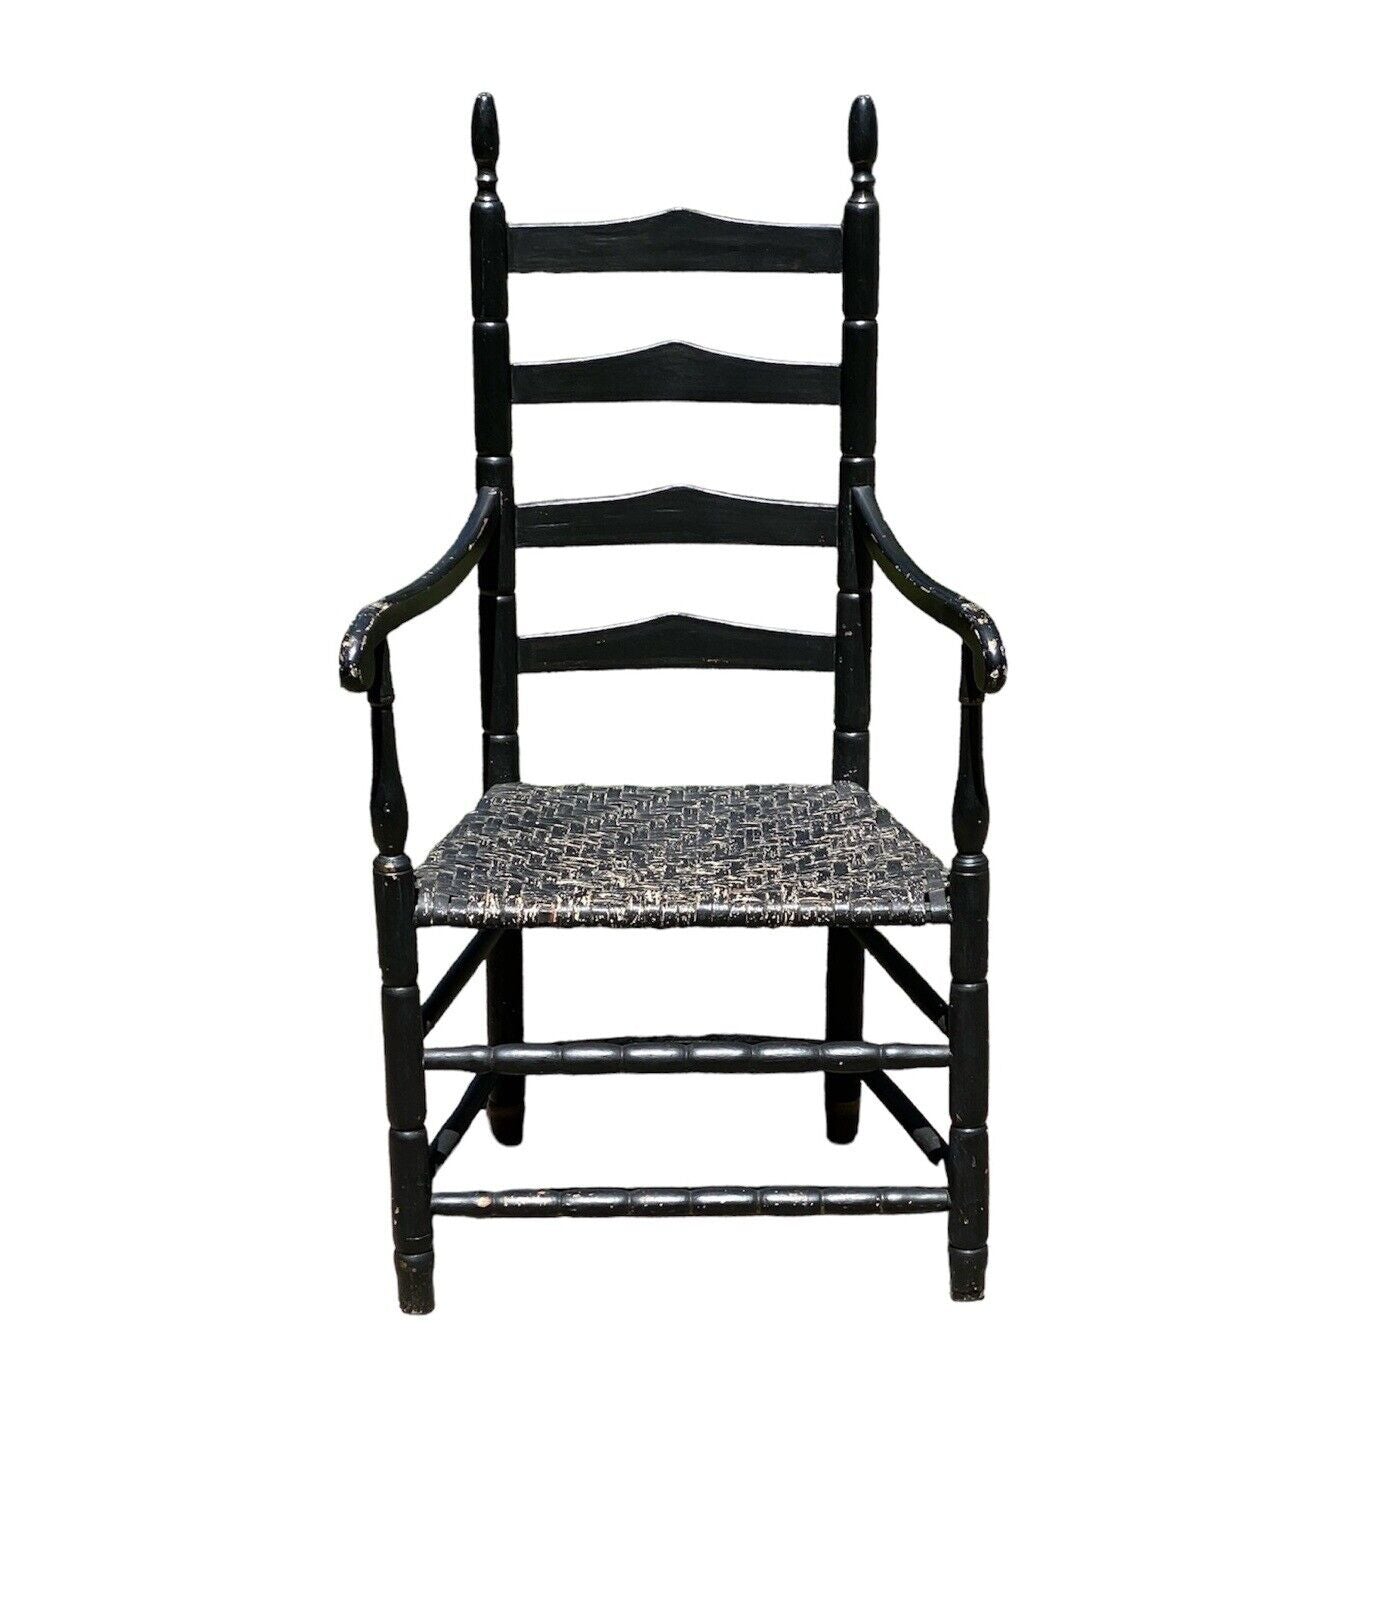 18th Century Antique Queen Anne Ladderback Chair in Black With Ram's Head Arms